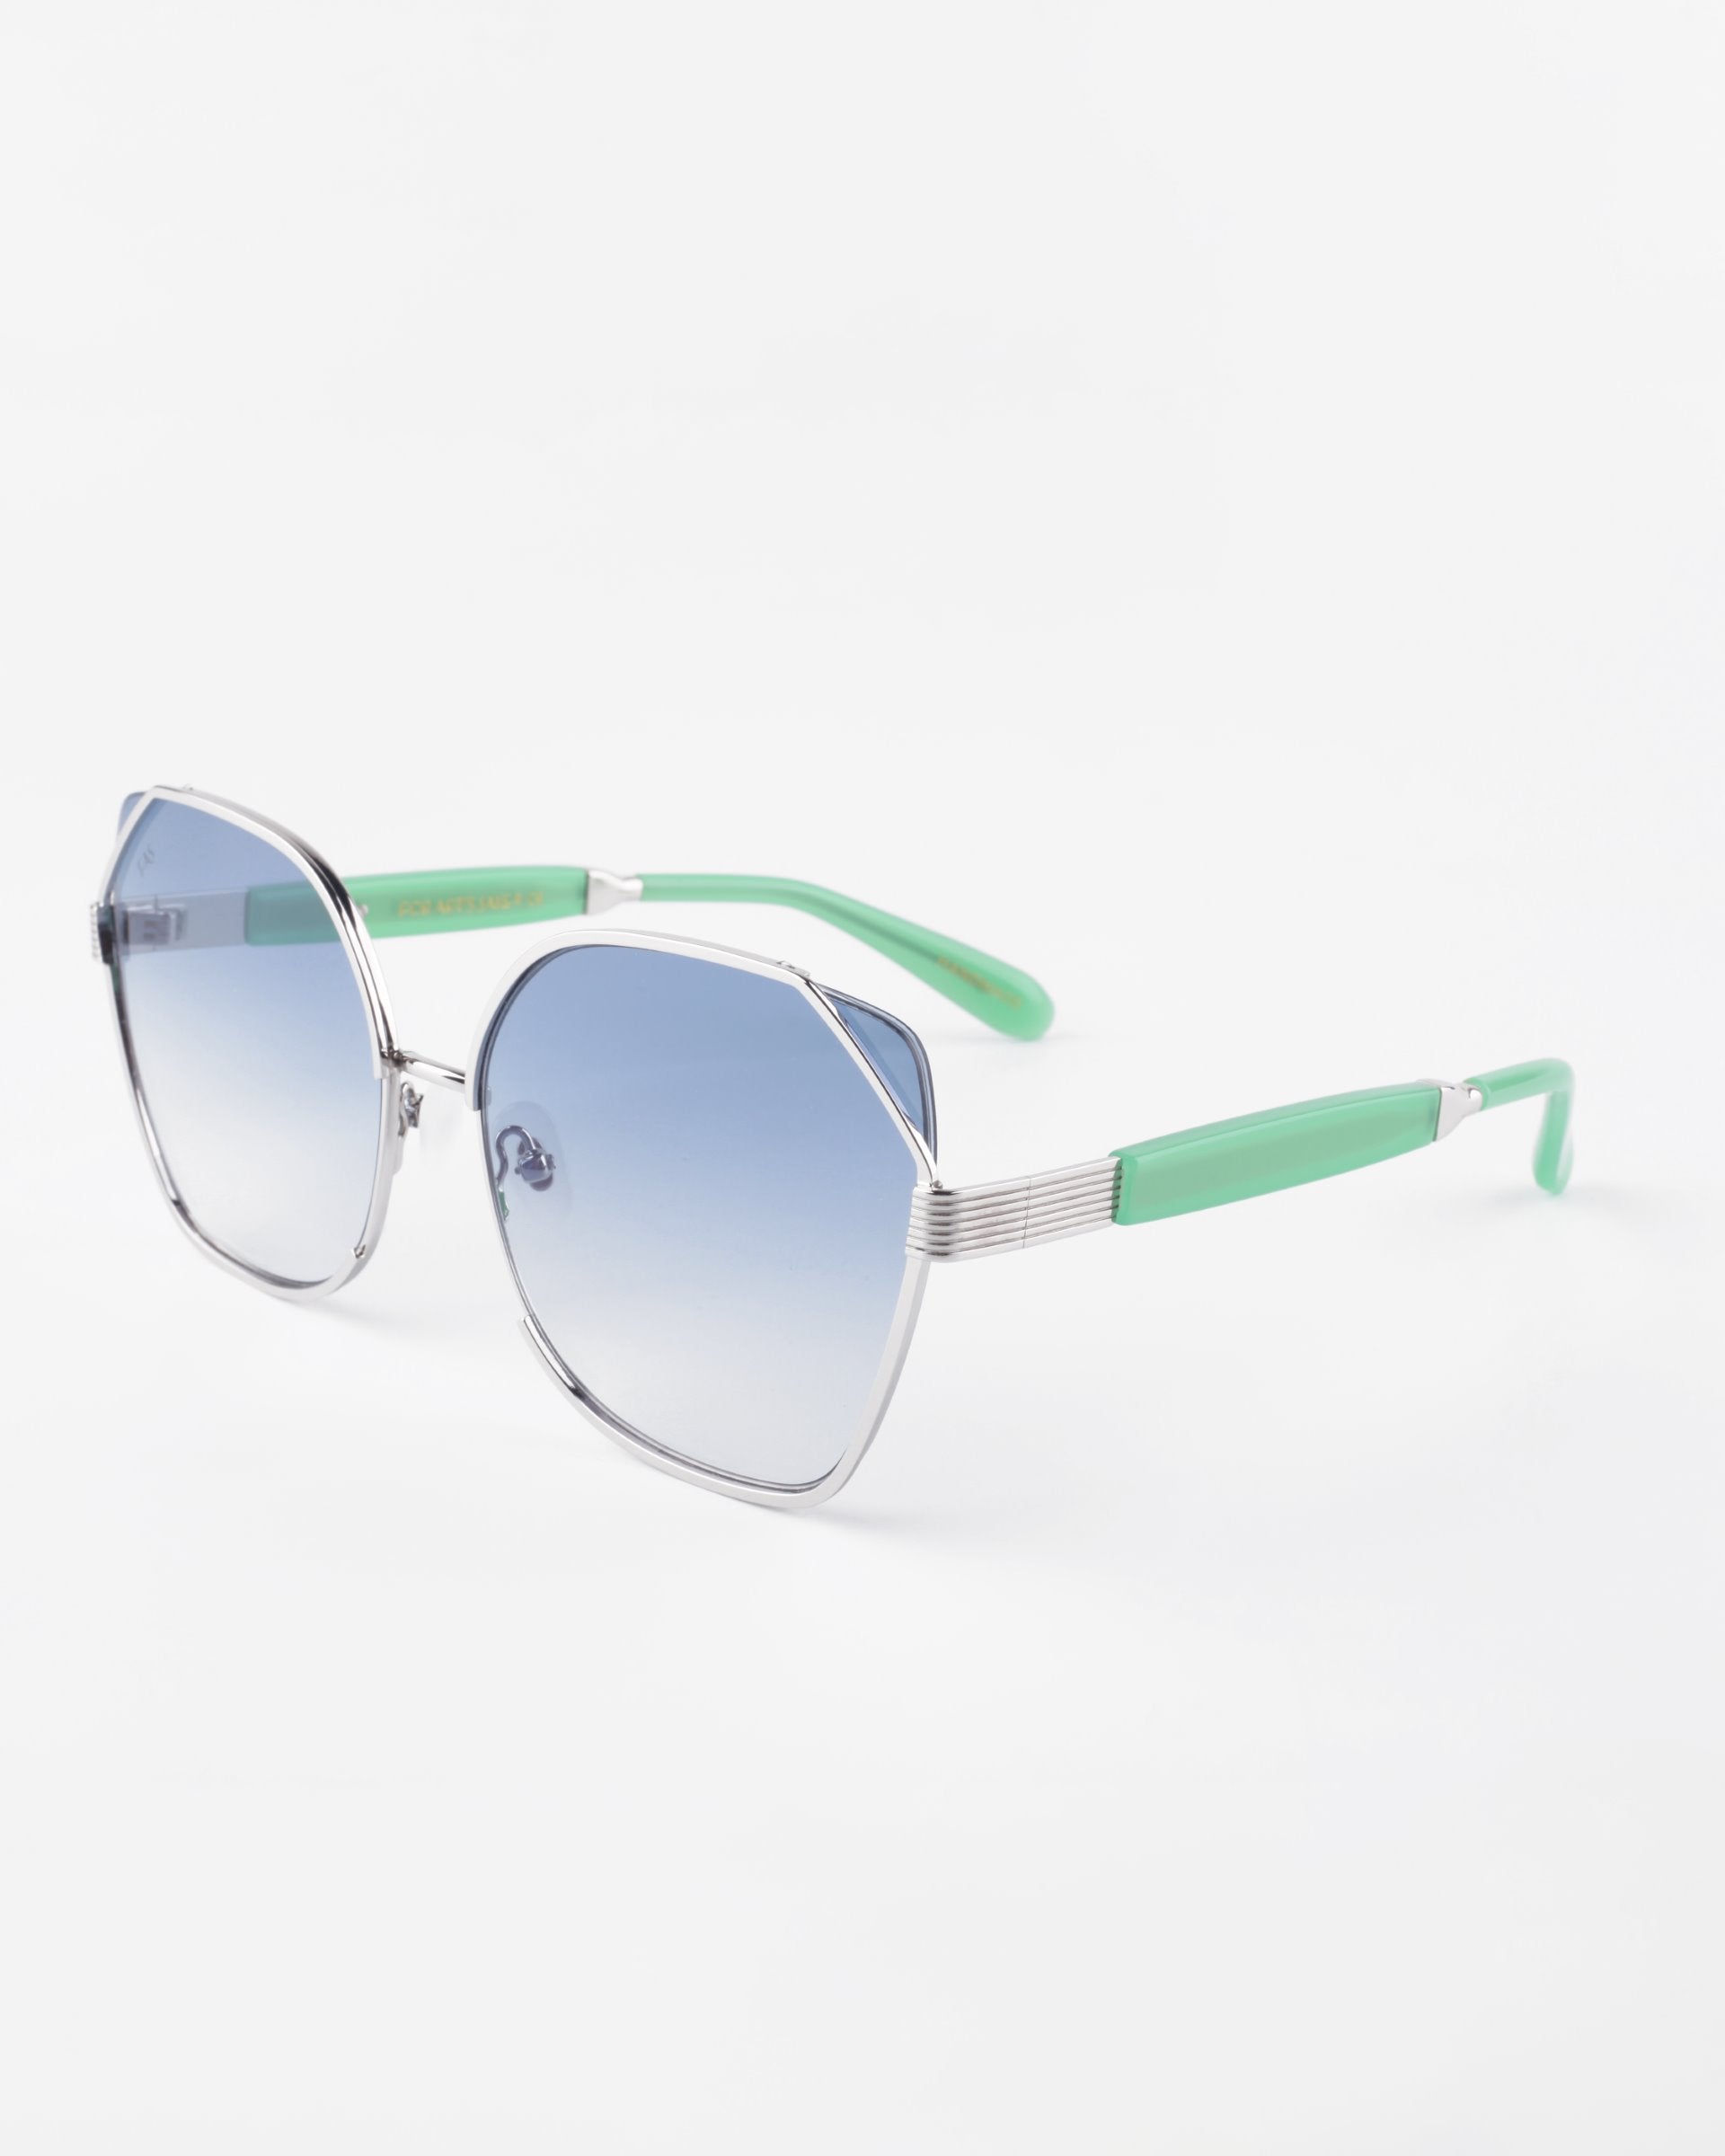 A pair of stylish For Art&#39;s Sake® Montage sunglasses featuring hexagonal frames with silver rims and light blue gradient lenses. The temples are mint green with silver accents near the hinges, crafted from gold-plated stainless steel. Ultra-lightweight nylon lenses provide 100% UVA &amp; UVB protection, creating a contemporary and fashionable look against a white background.